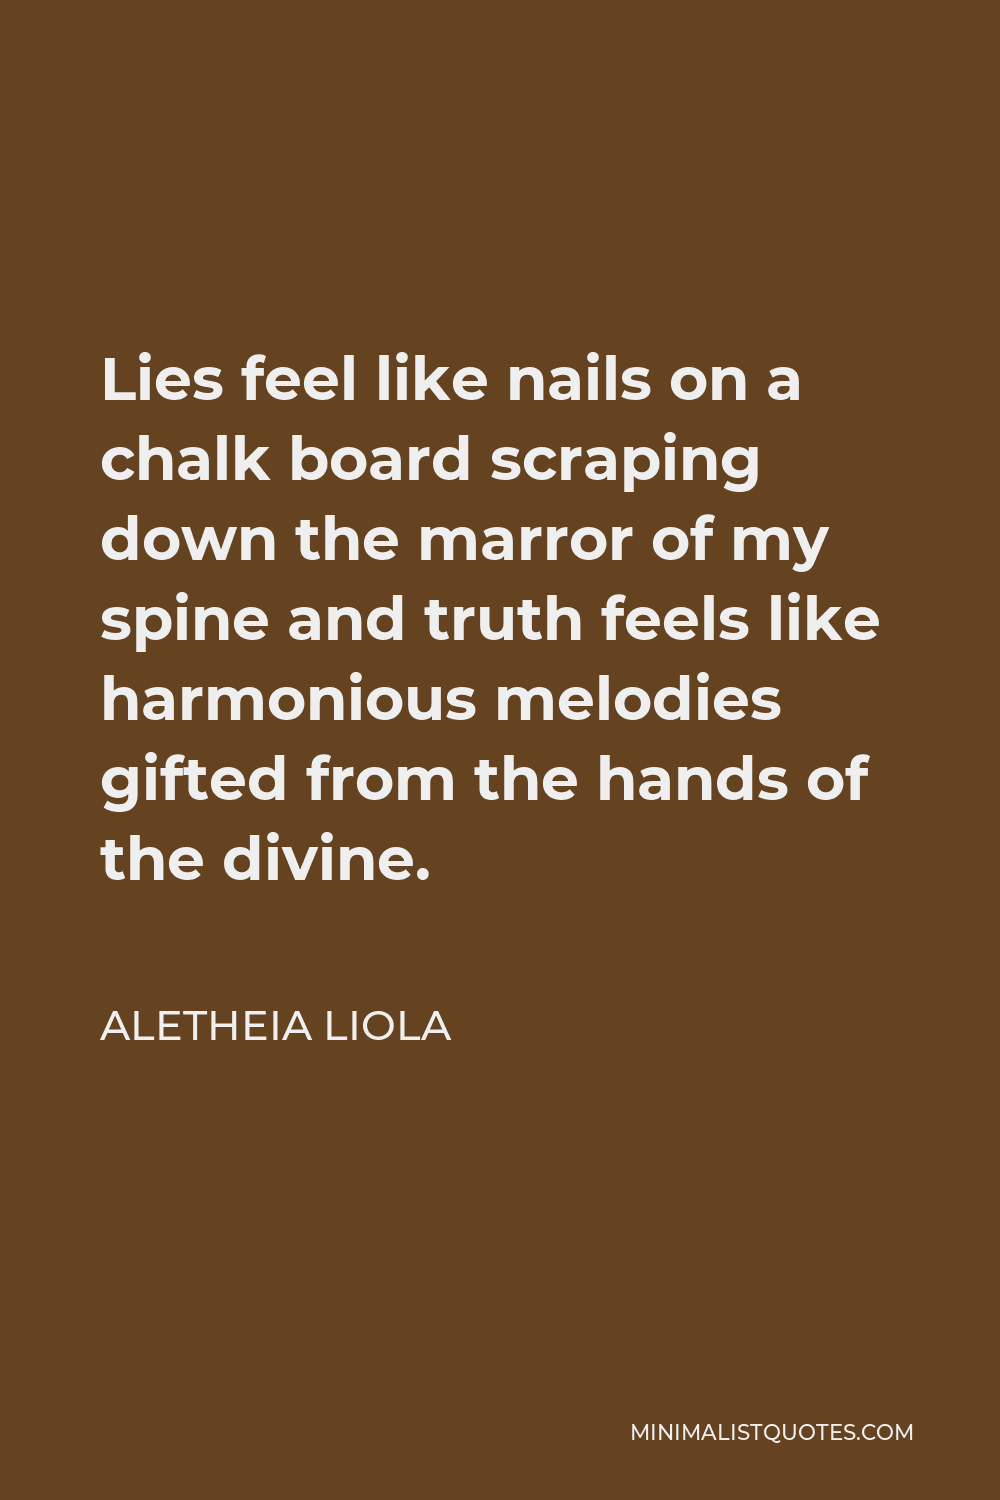 Aletheia Liola Quote - Lies feel like nails on a chalk board scraping down the marror of my spine and truth feels like harmonious melodies gifted from the hands of the divine.